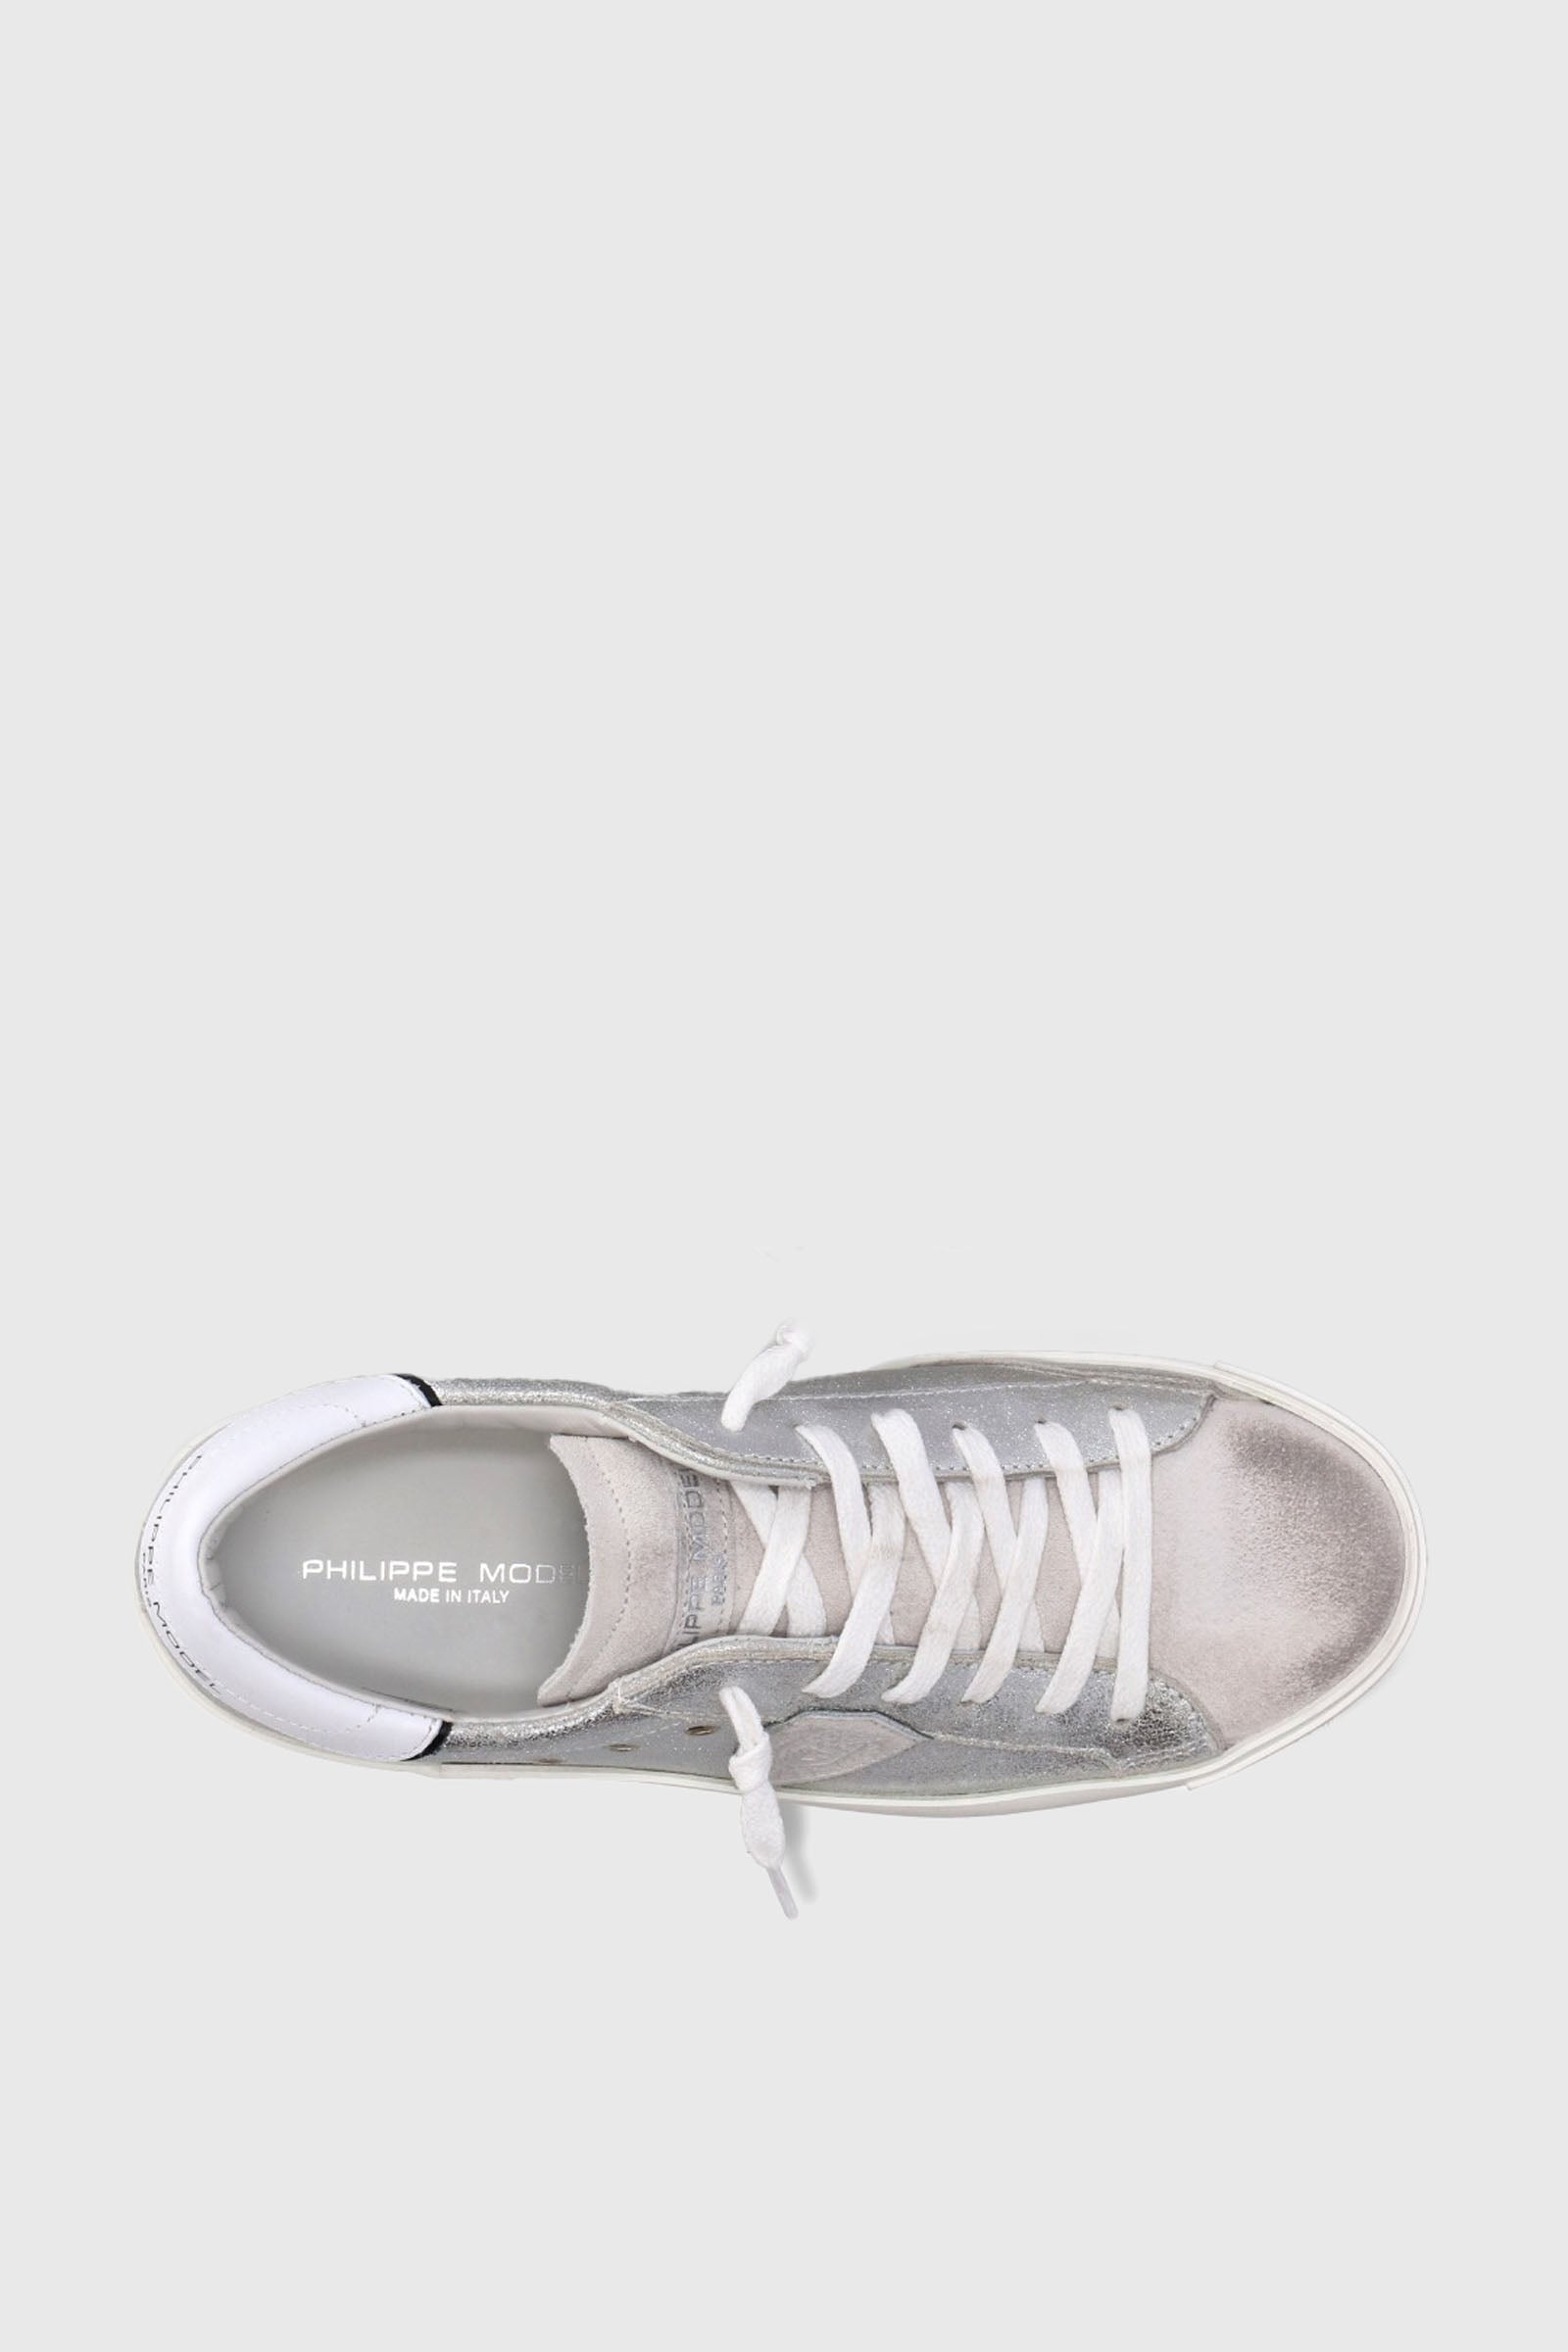 Philippe Model Sneakers PRSX Silver Leather - 4